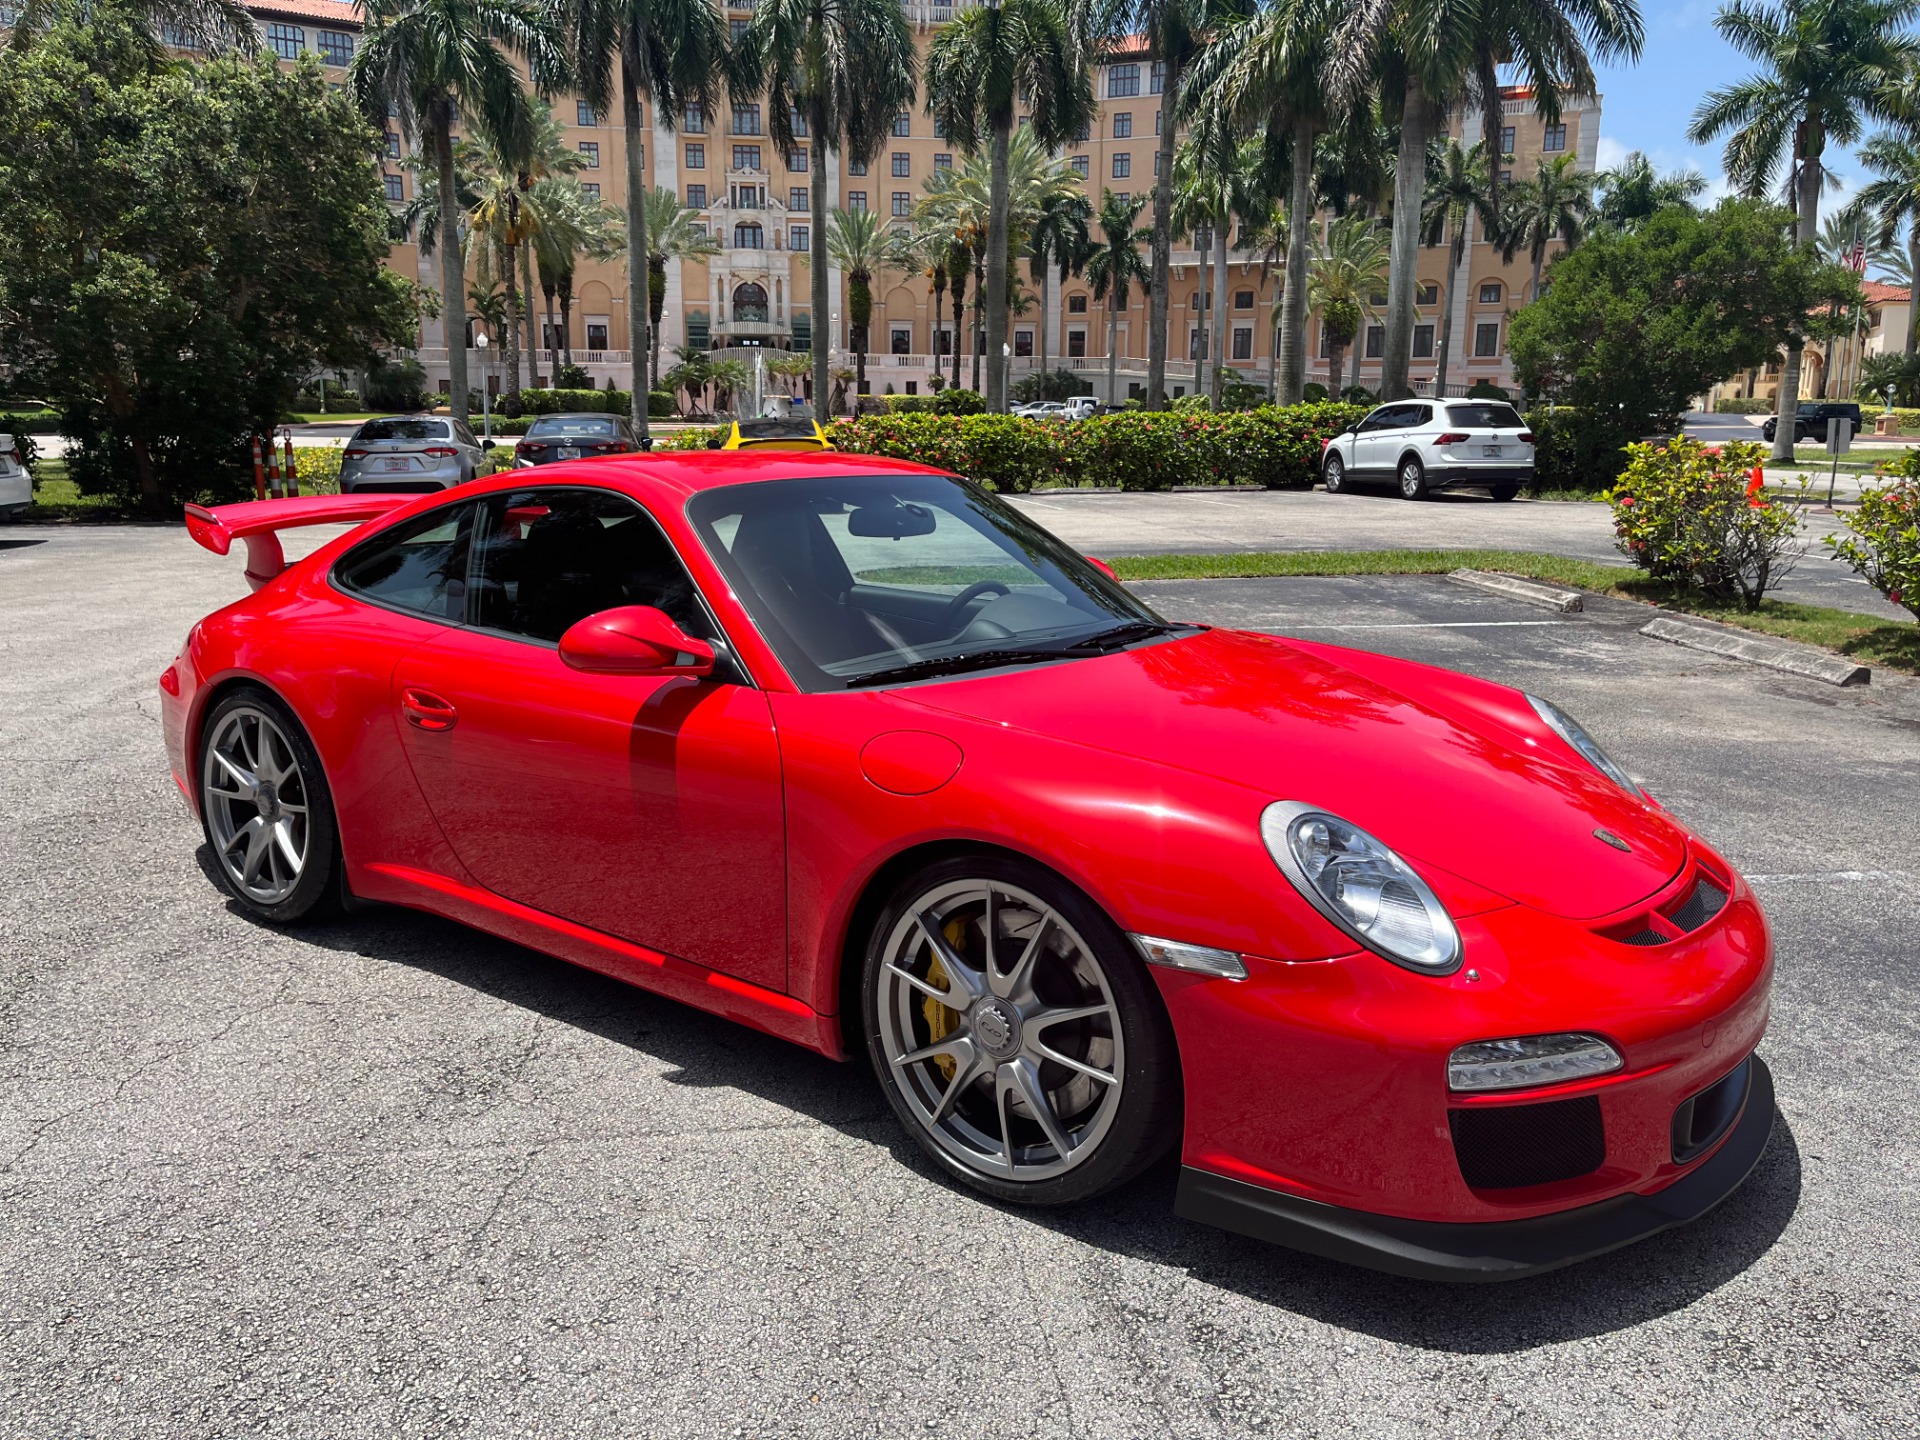 Used 2010 Porsche 911 GT3 for sale Sold at The Gables Sports Cars in Miami FL 33146 2